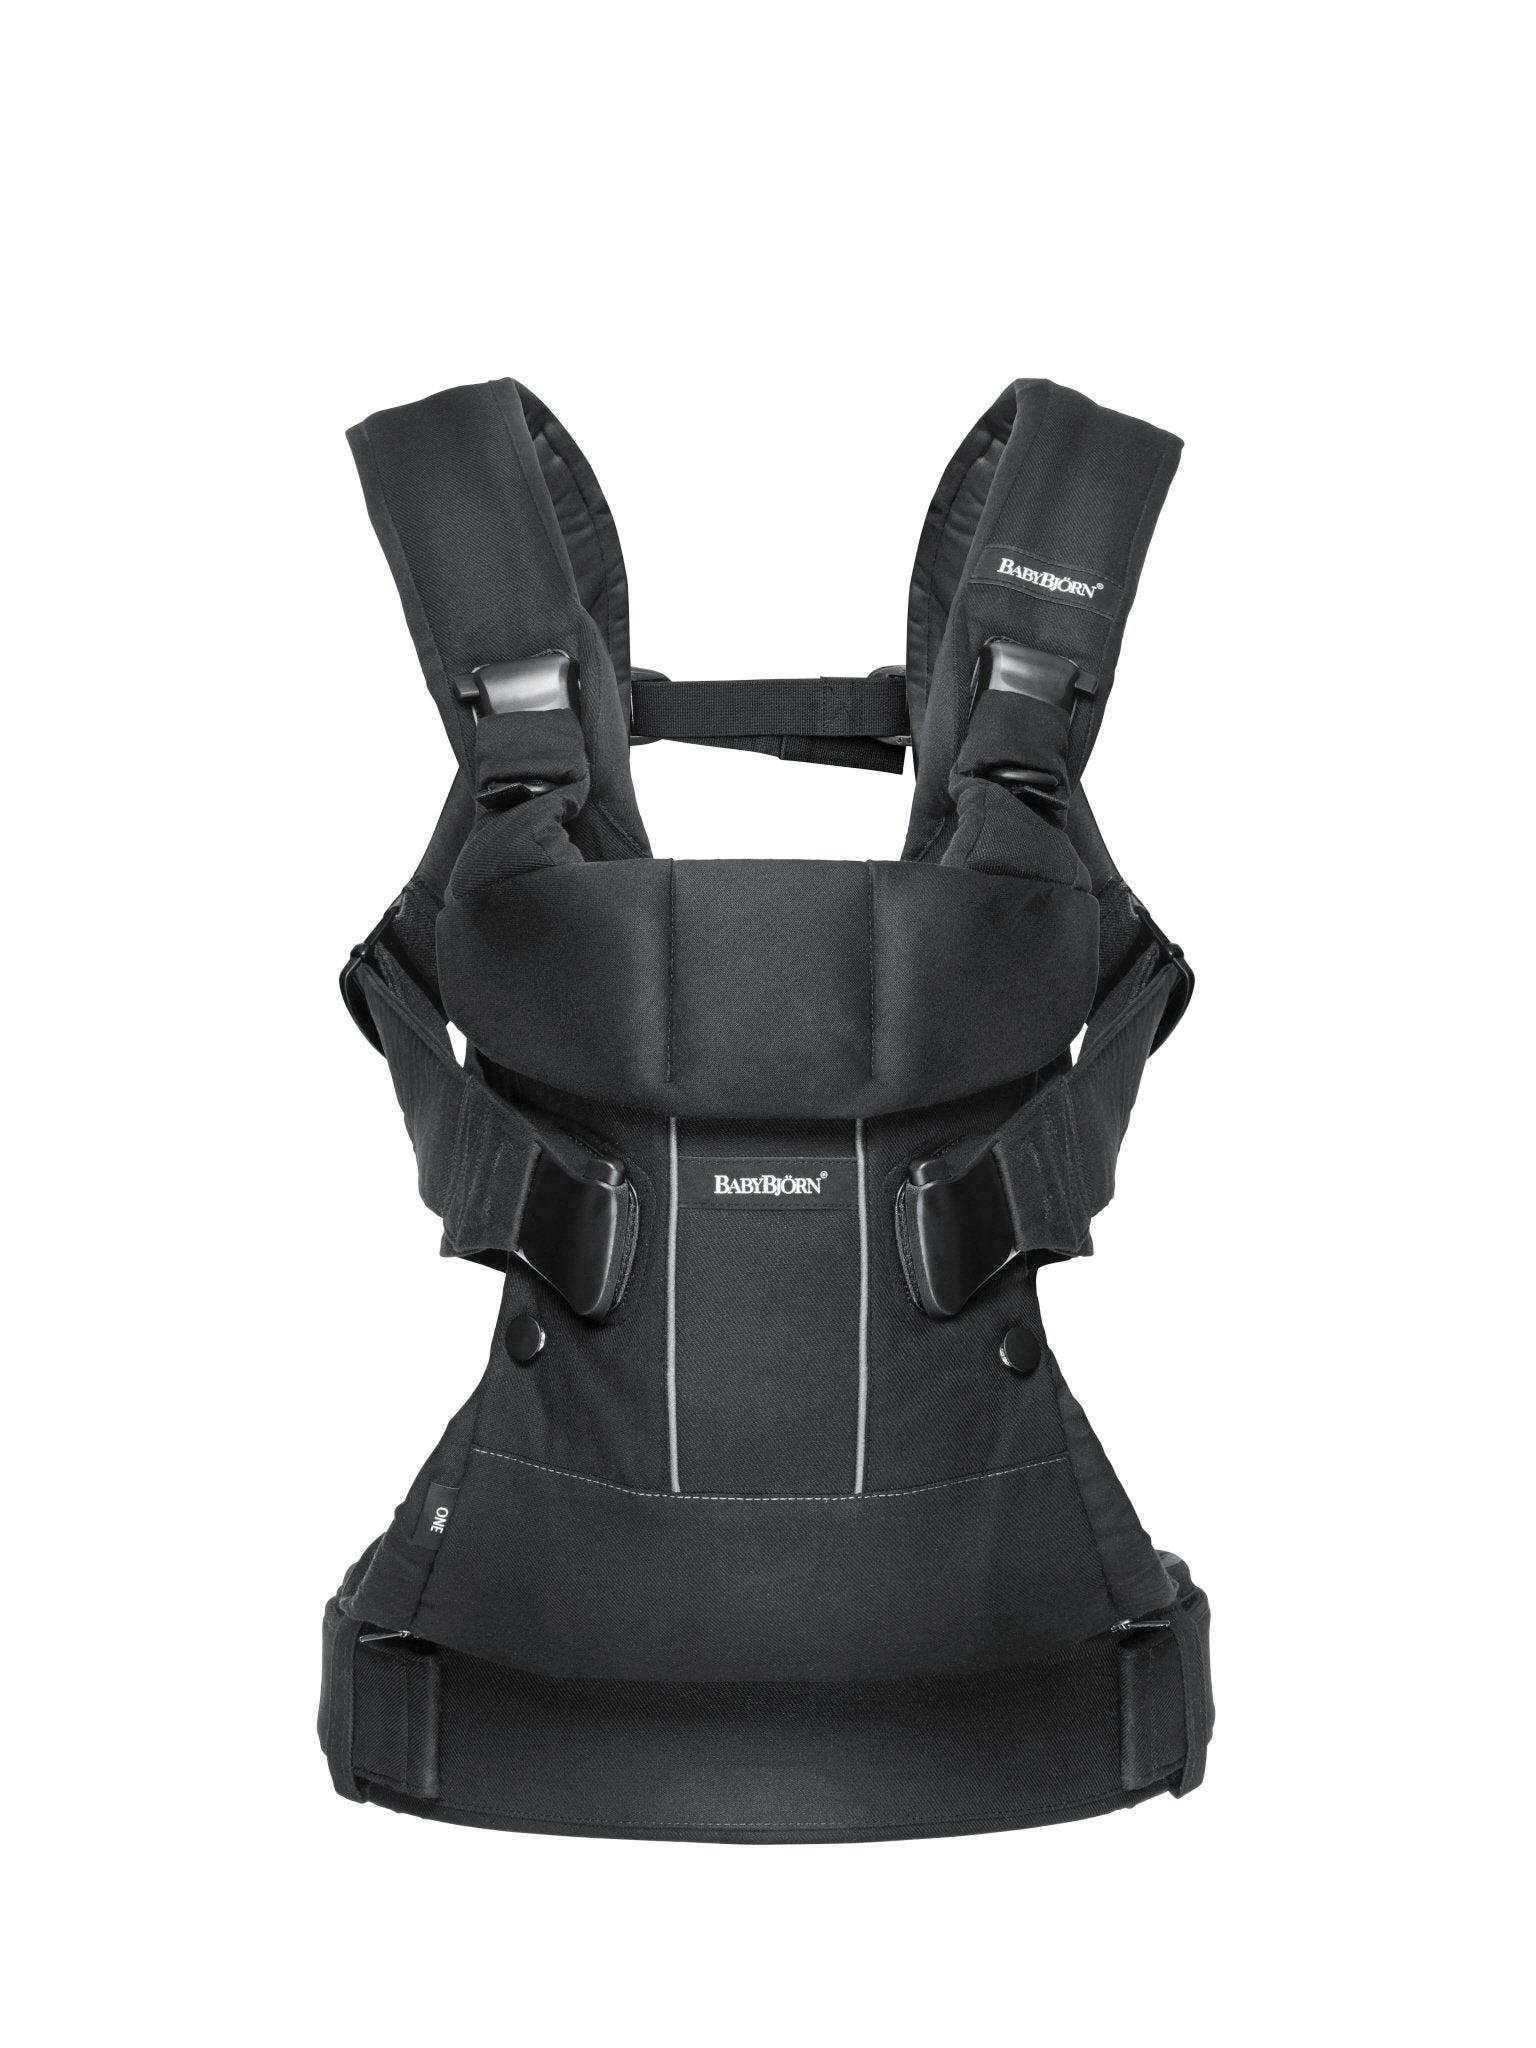 A Buyer's Guide to BabyBjörn Carriers & Bouncers